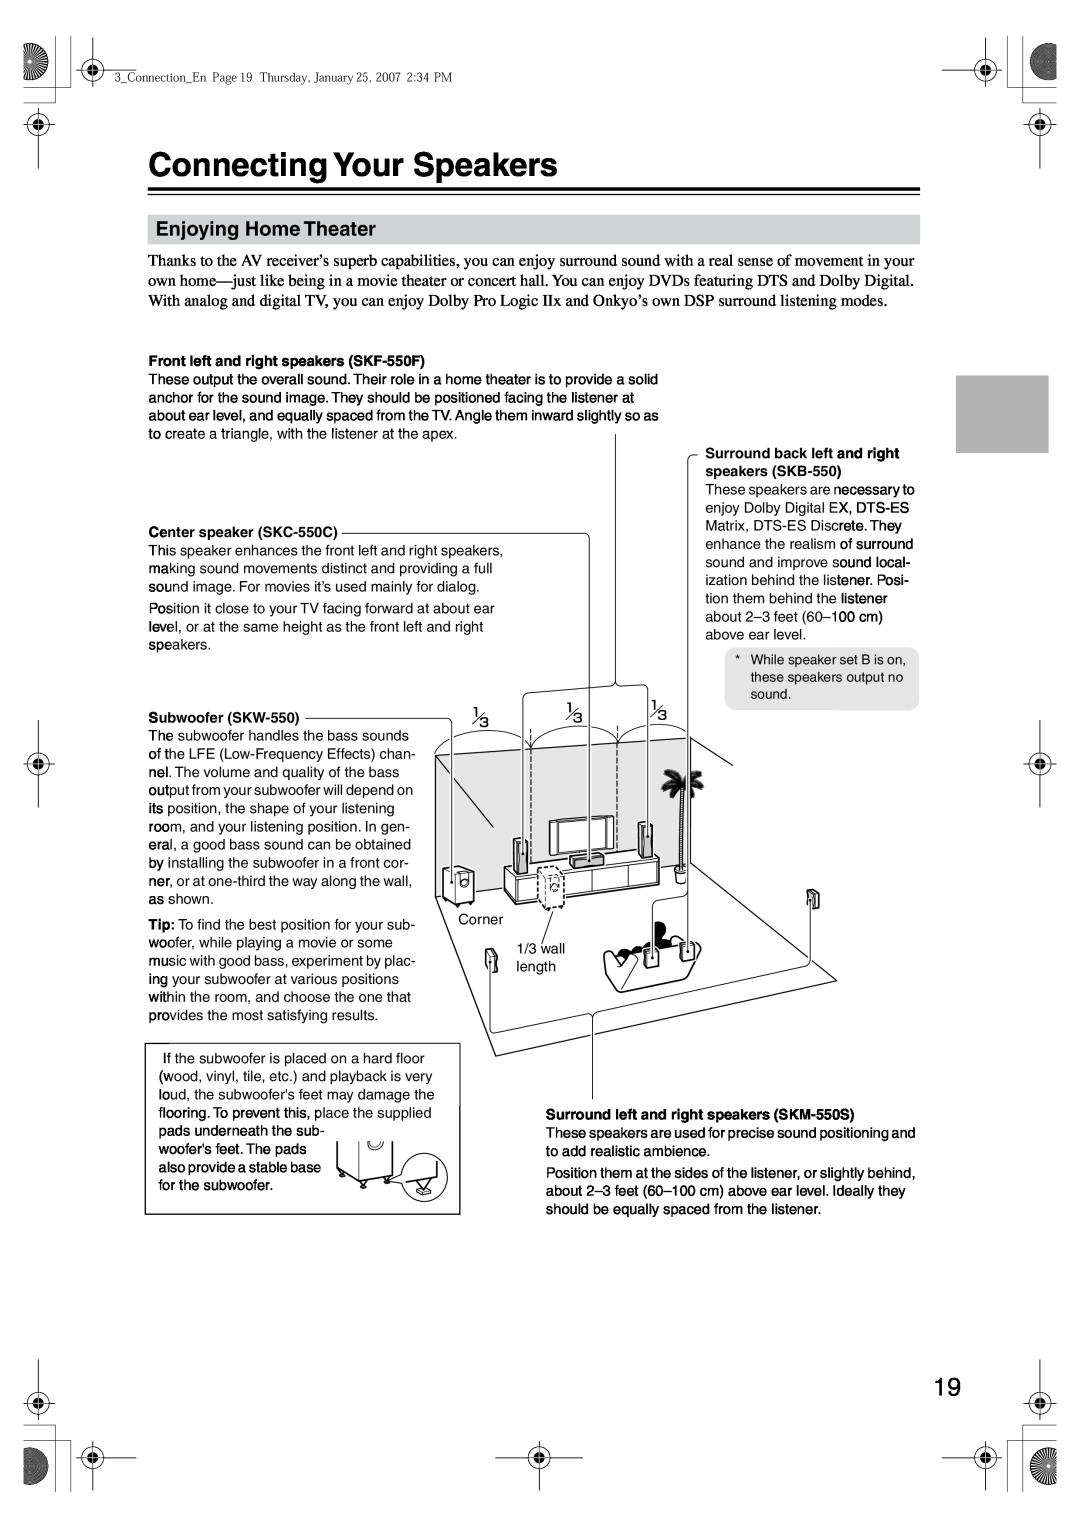 Onkyo HT-SR800 instruction manual Connecting Your Speakers, Enjoying Home Theater 